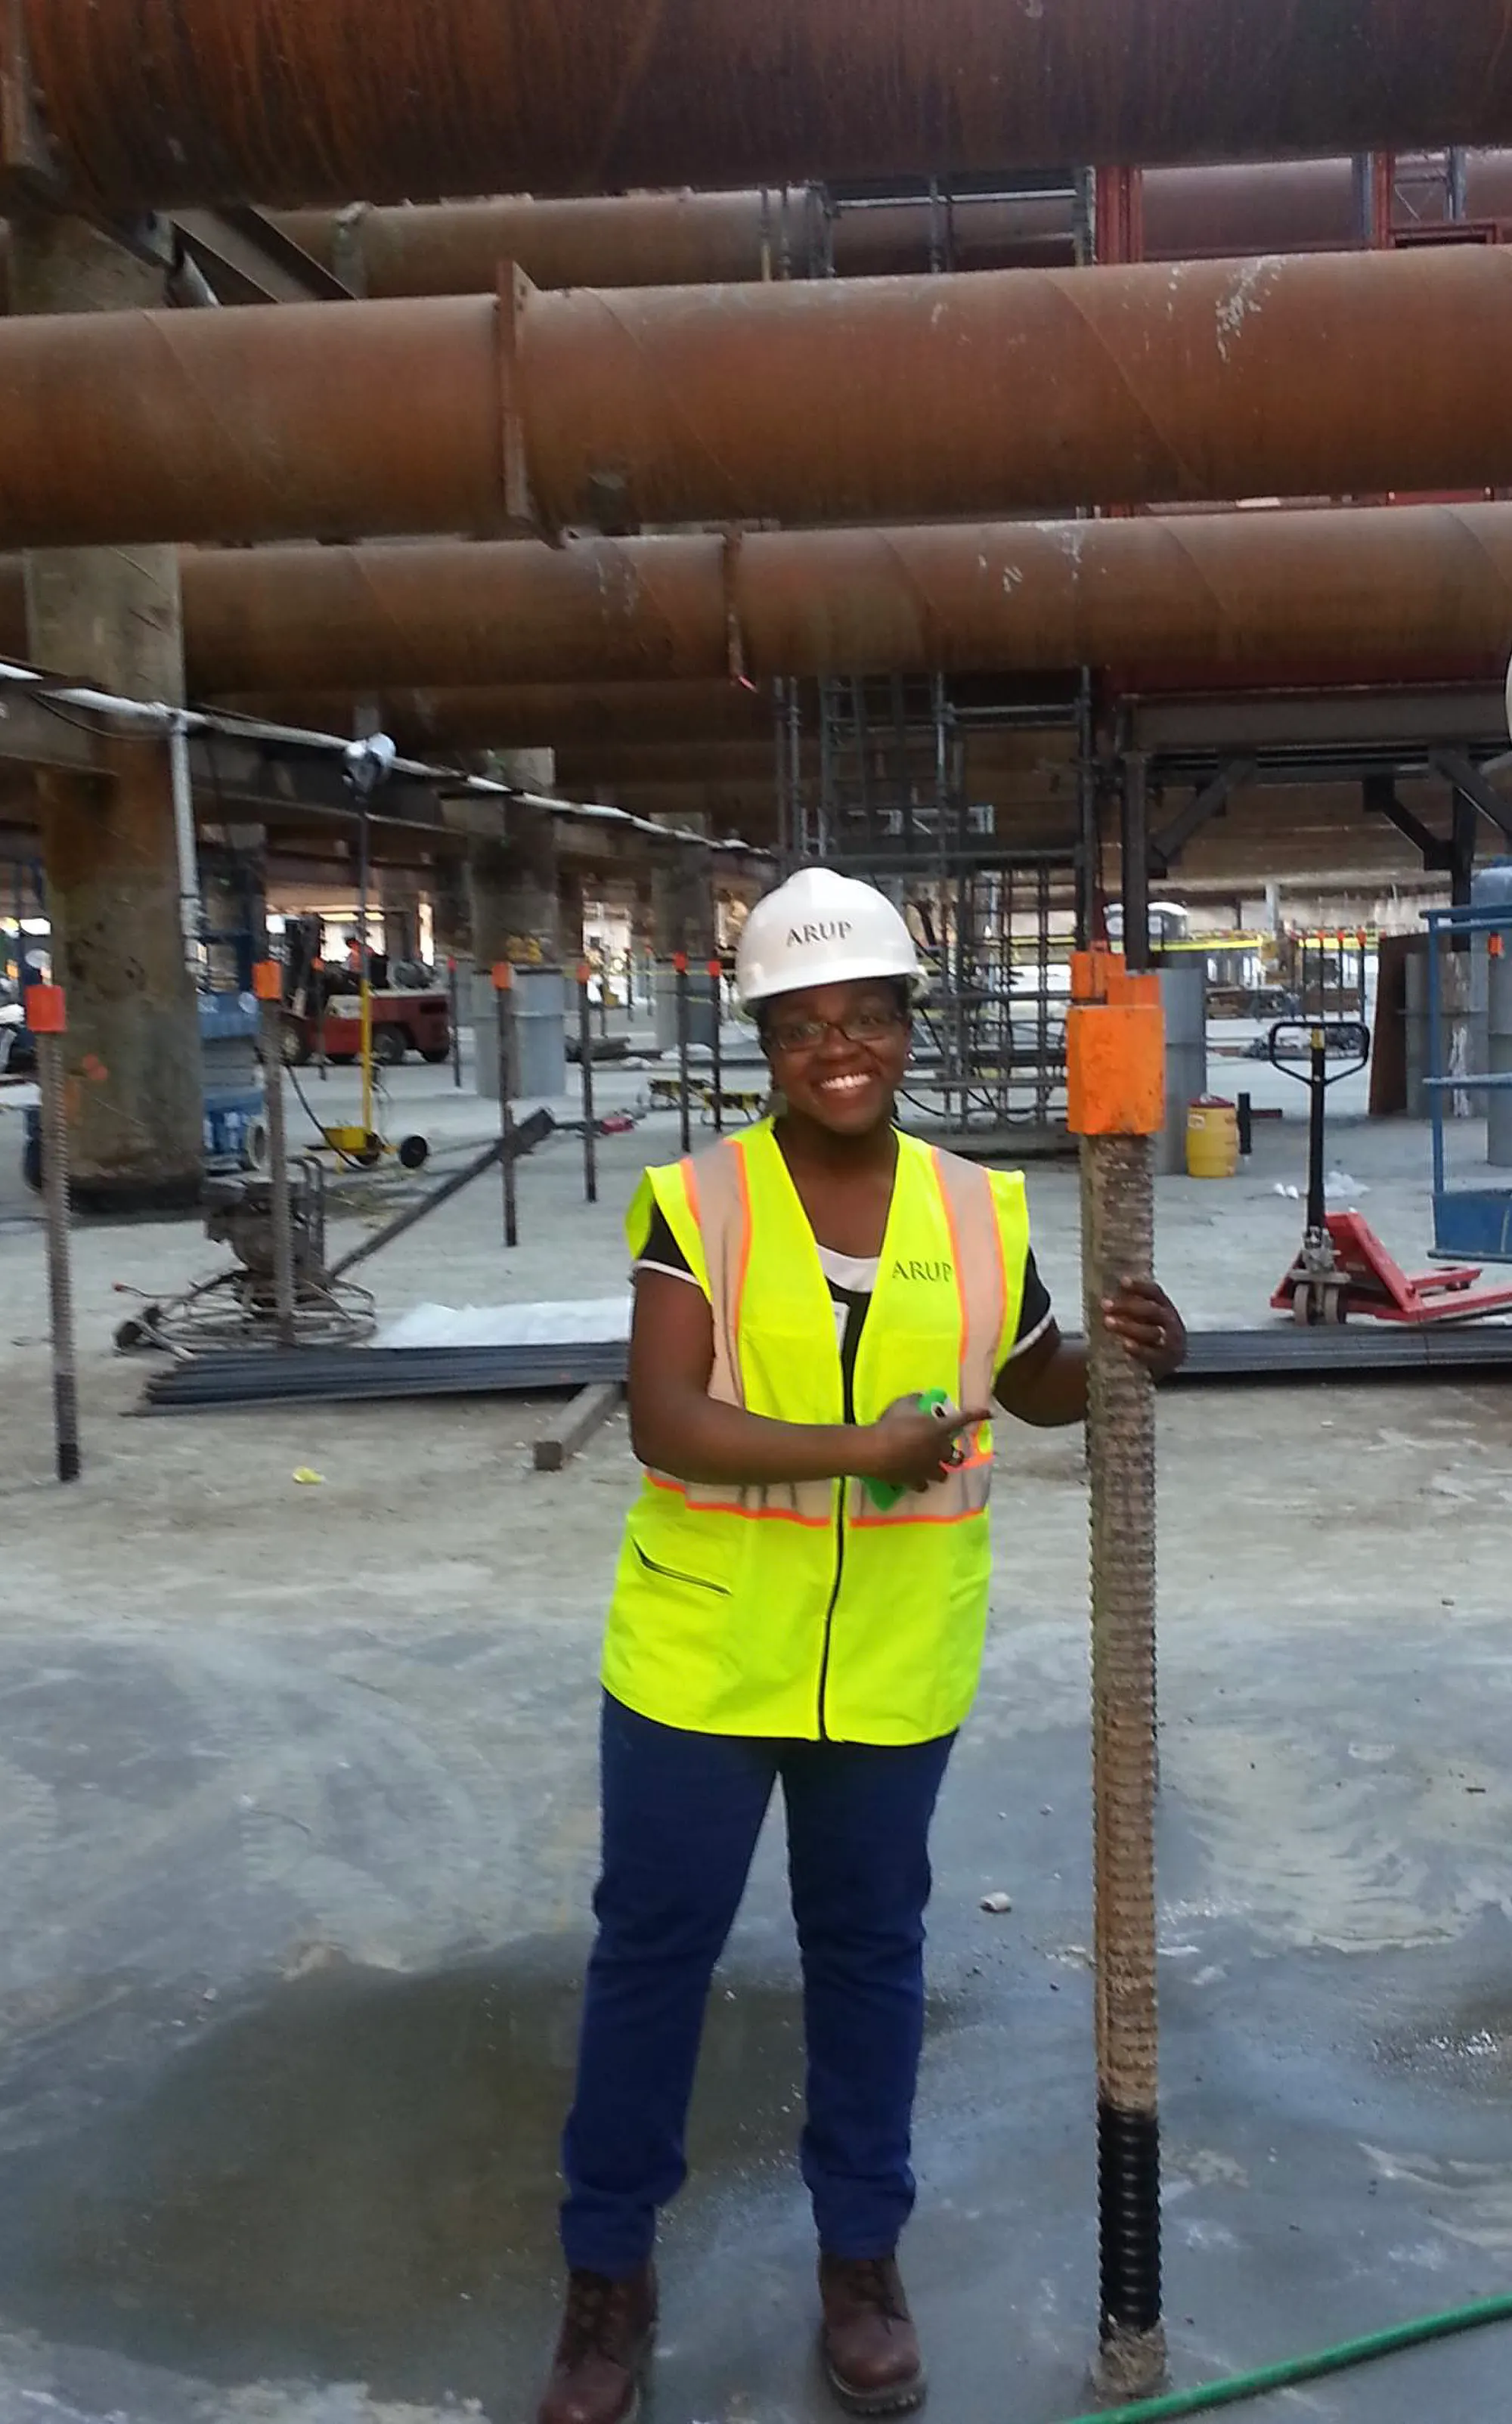 A photograph of a black woman wearing a hard hat, a safety vest, jeans, and work boots poses with rebar in the foreground of a construction site. 